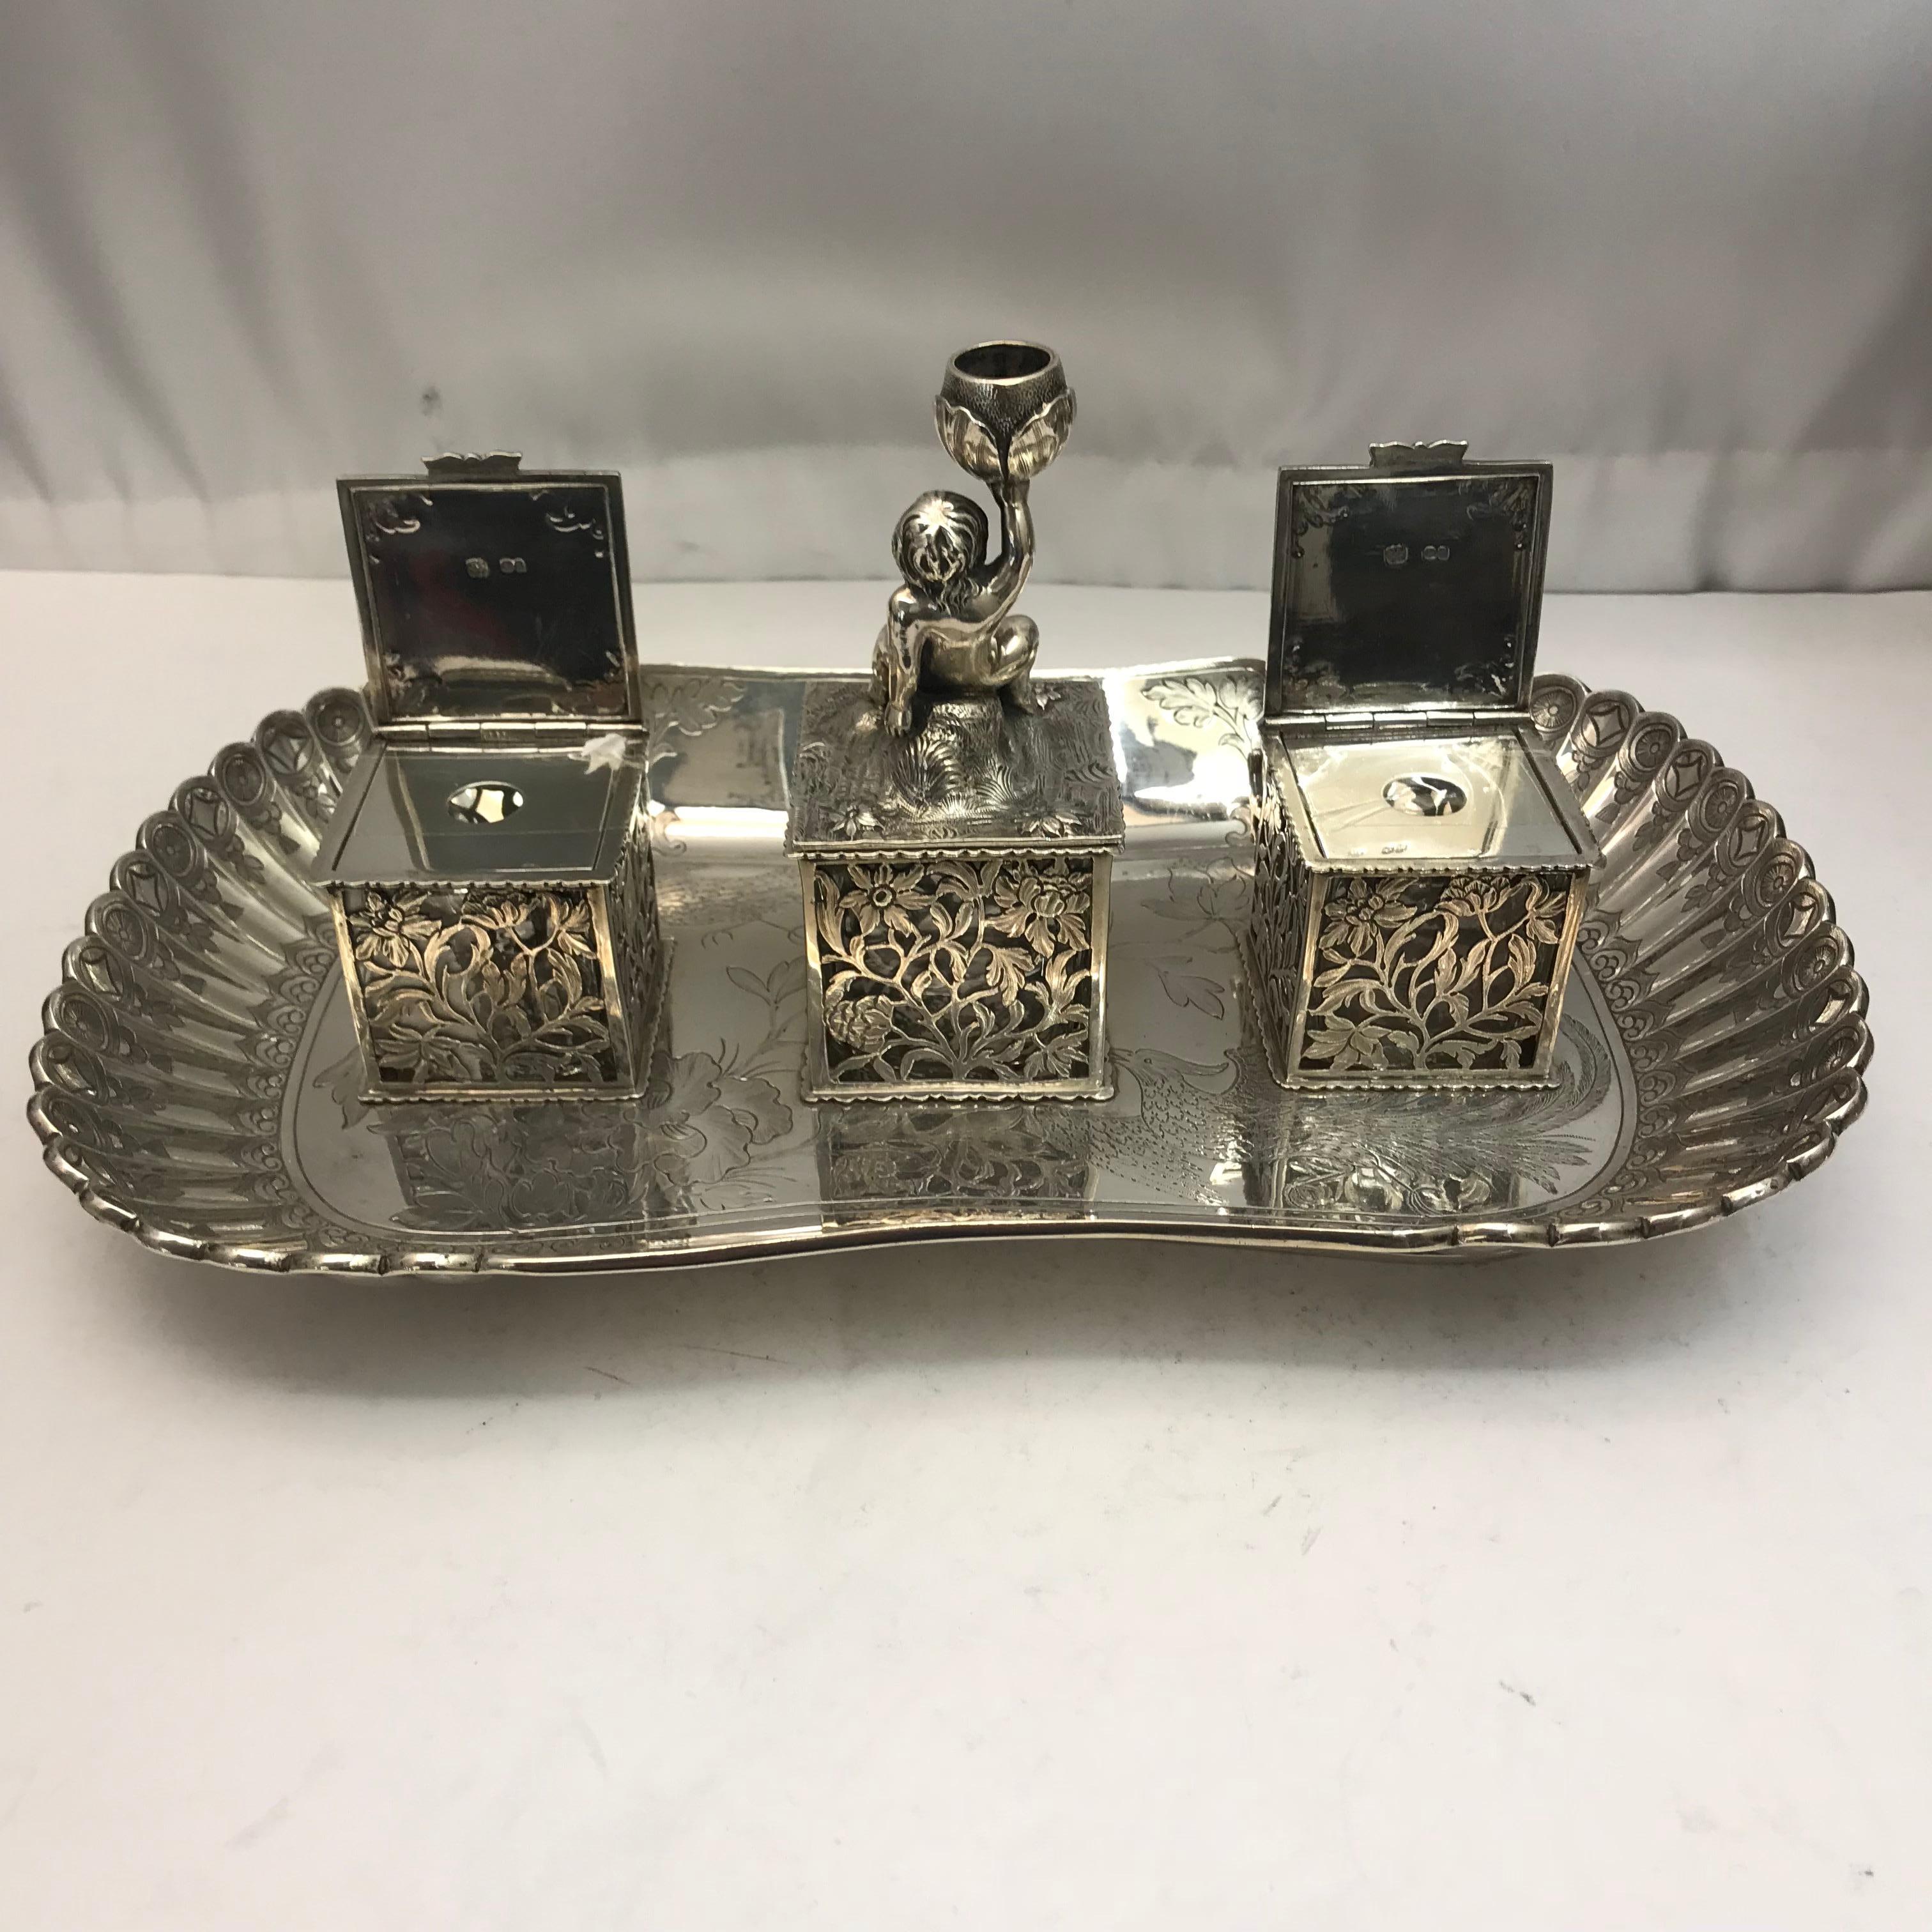 A 19th century antique silver inkwell with two lidded ink holders. Decorated beautifully. 

Made in London by G.G Fox

Measures: 5.50 inch high

11.50 inch wide.